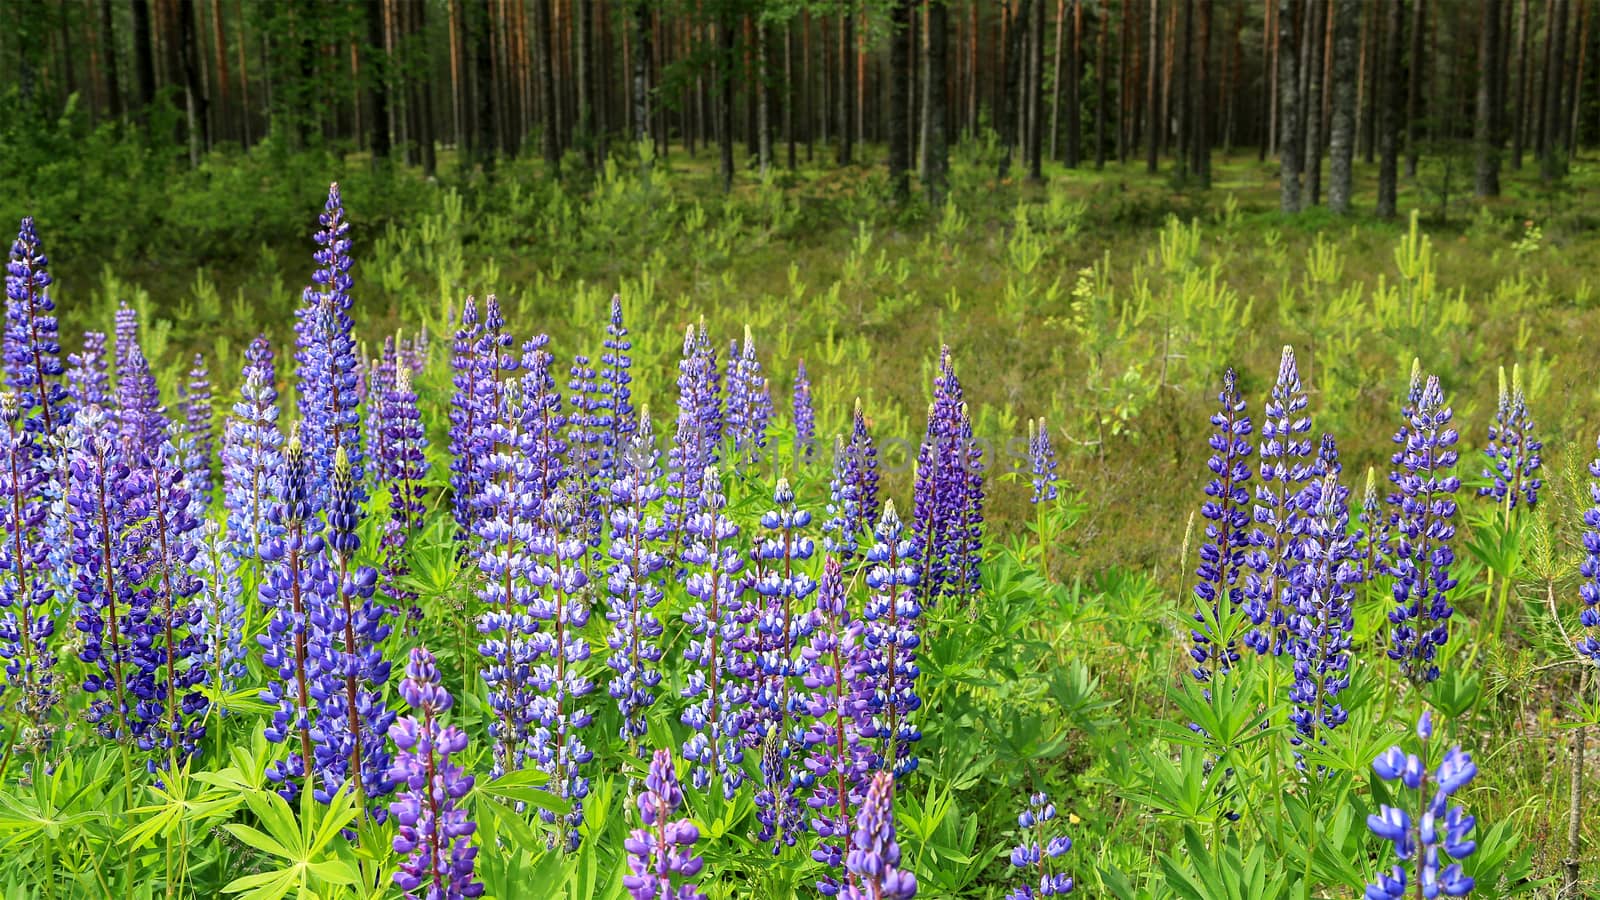 Purple Lupins by Green Forest by Tainas